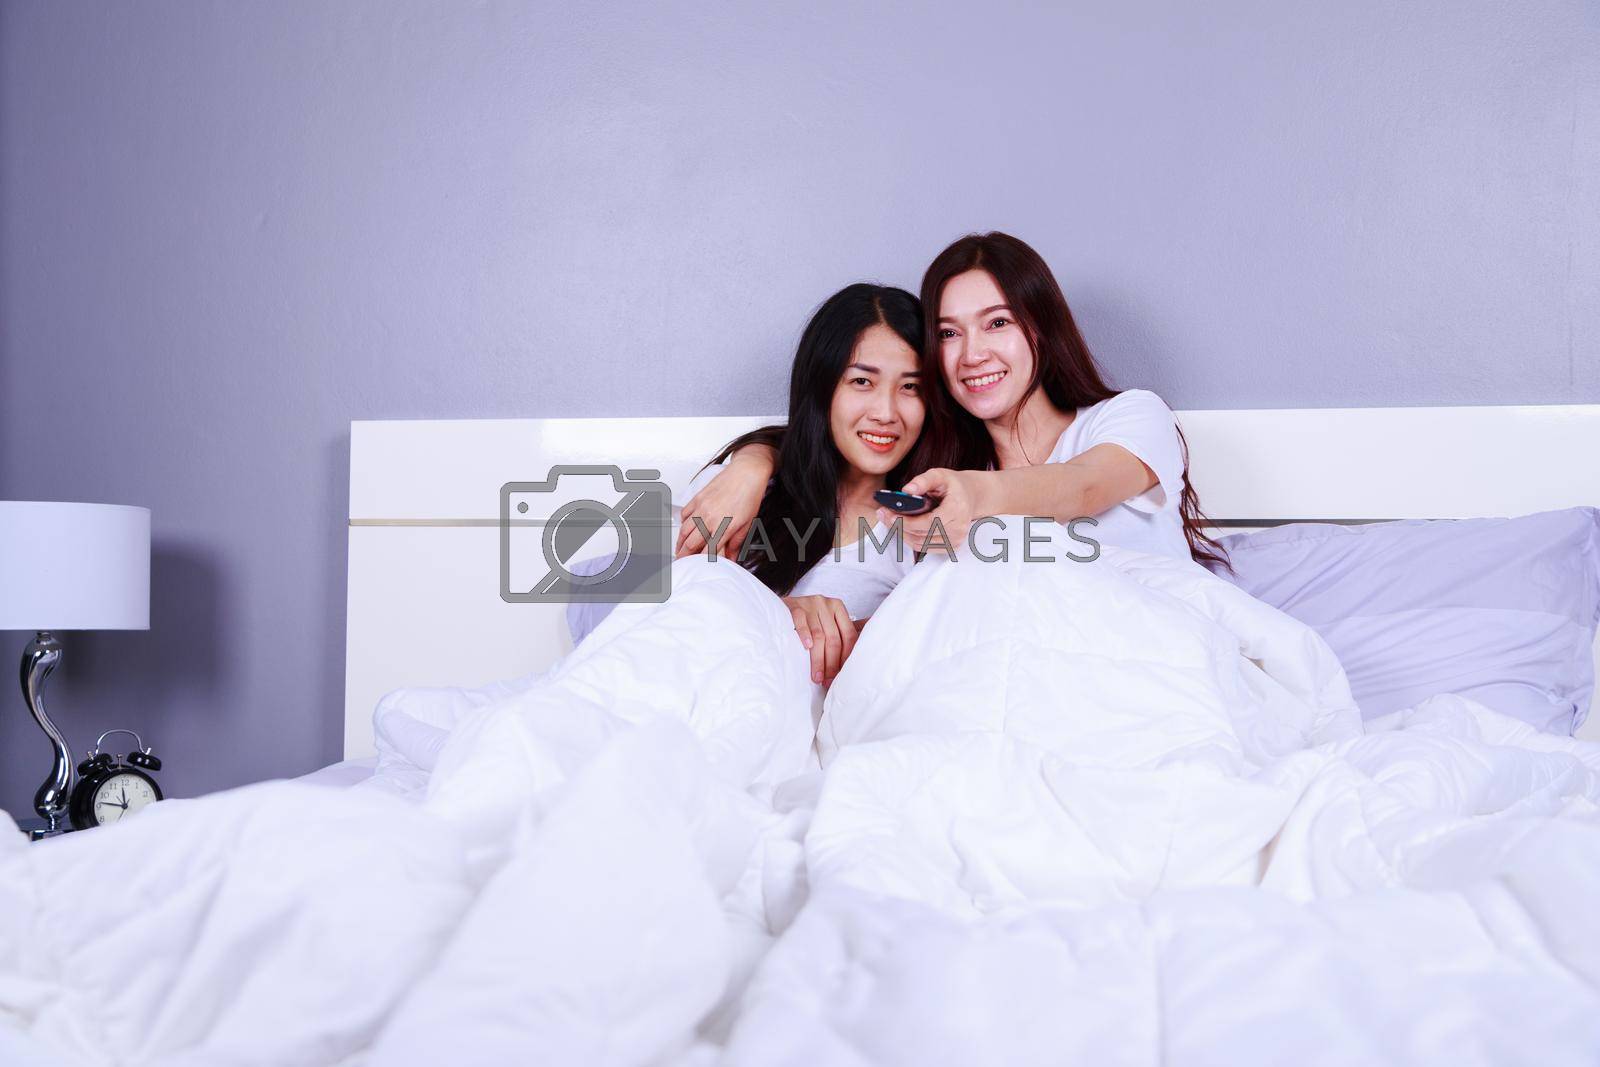 Royalty free image of two best friends watching tv with remote on bed in bedroom by geargodz